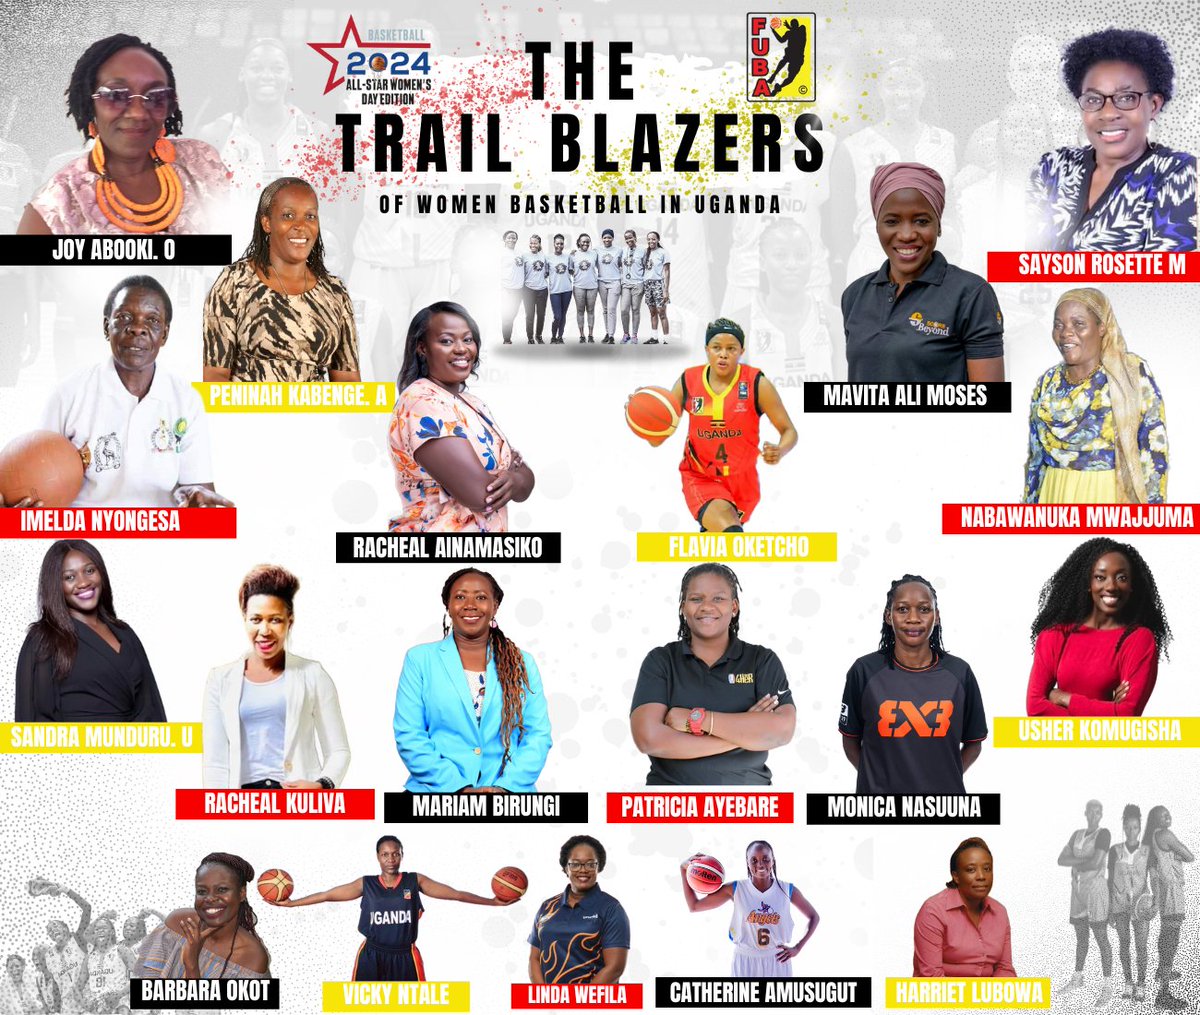 So excited to  celebrate alongside these incredible women in basketball this Friday at Lugogo at the #FUBAAllStarWomen 
'Girl in The Verse is building a unique basketball community by & for women, empowering them to conquer'!#trailblazers #WomenBasketball #InternationalWomensDay